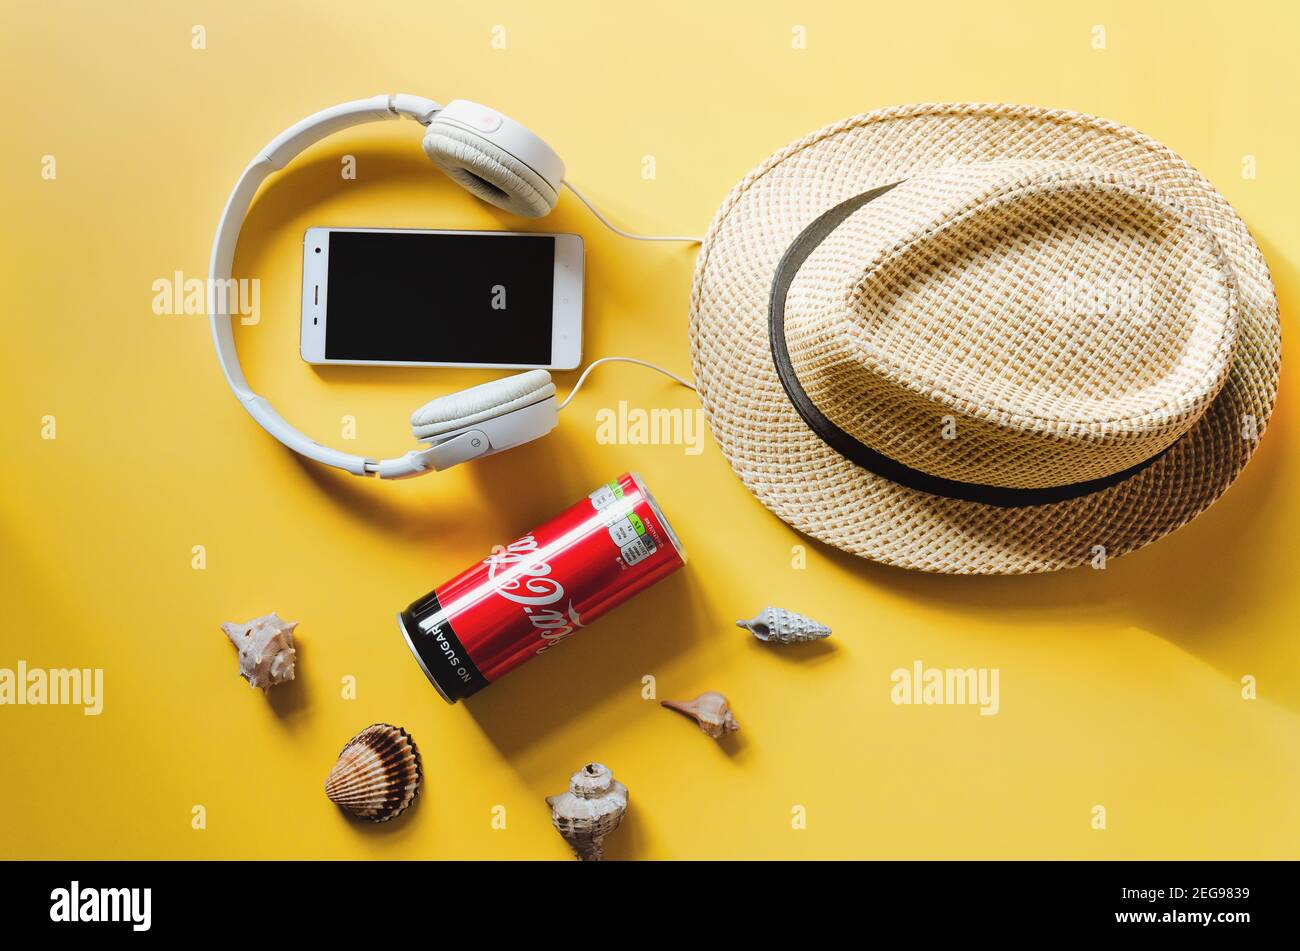 Travel under Covid-19 and new normal concepts. Top view of white headphones, can of Coca- Cola, phone and beach hat on yellow background close up Stock Photo